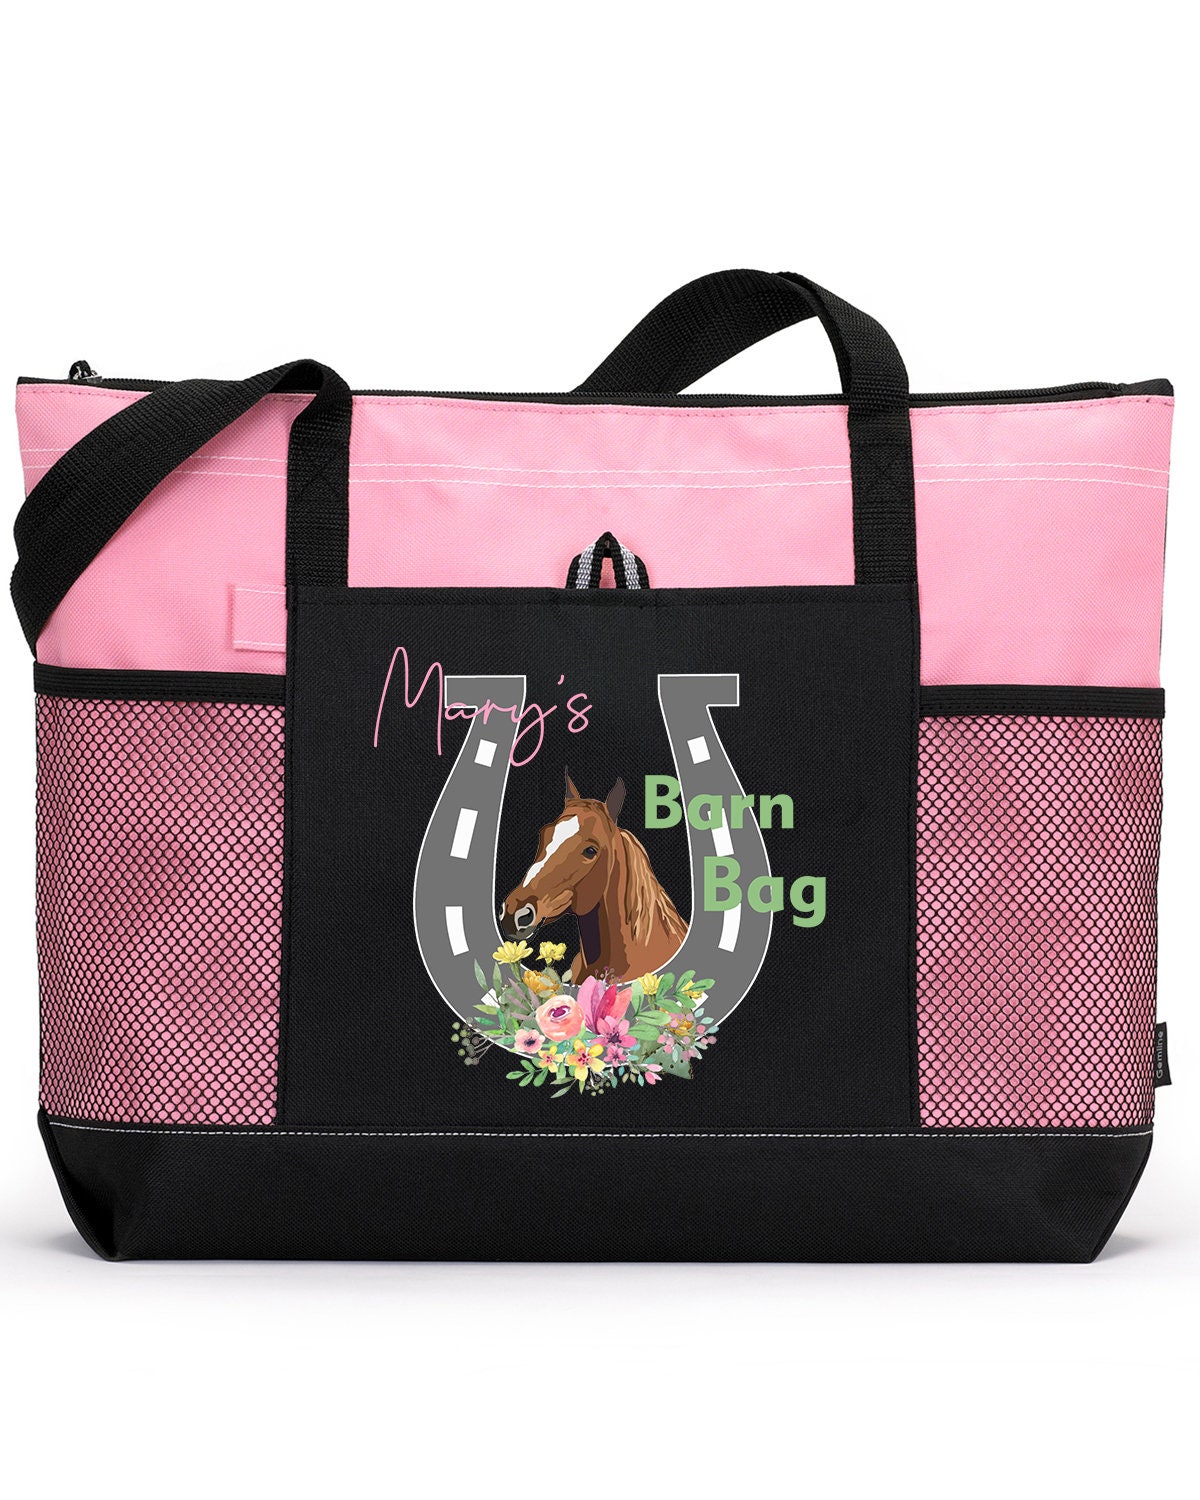 Gym Bag Sewing Pattern and Yoga Mat Carrying Strap Project 